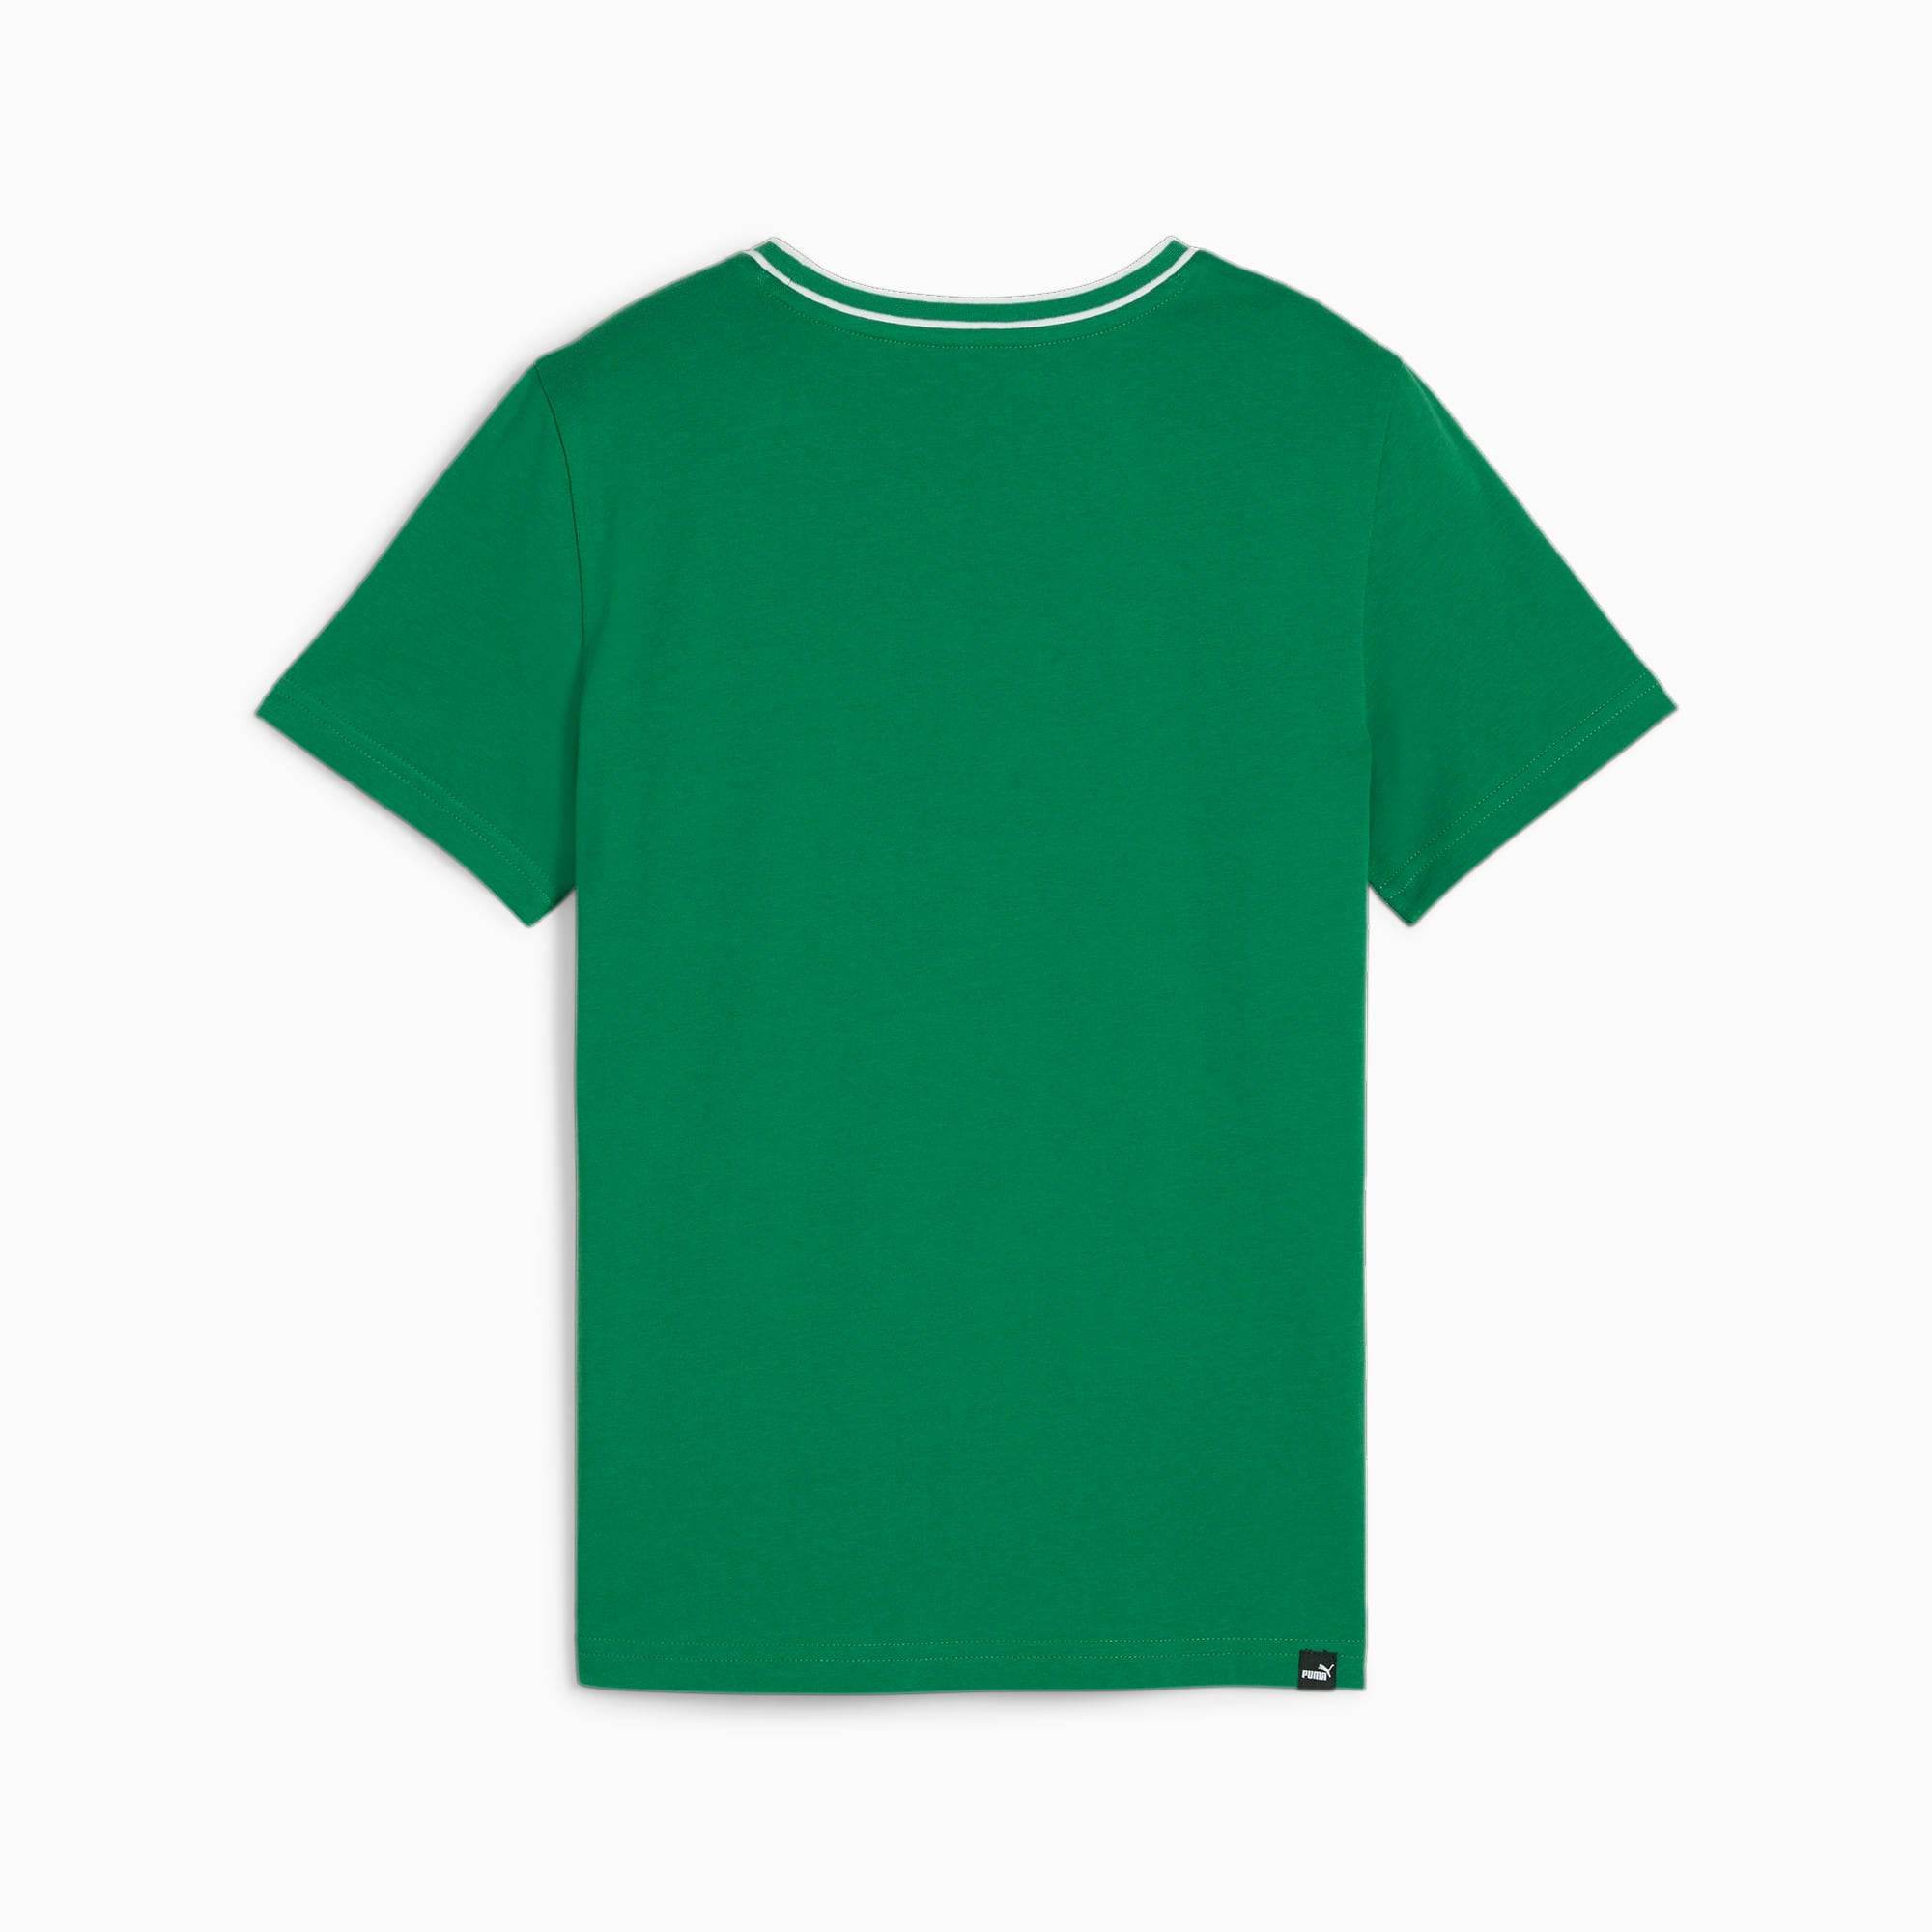 PUMA Squad Youth T-Shirt, Archive Green, Size 128, Clothing